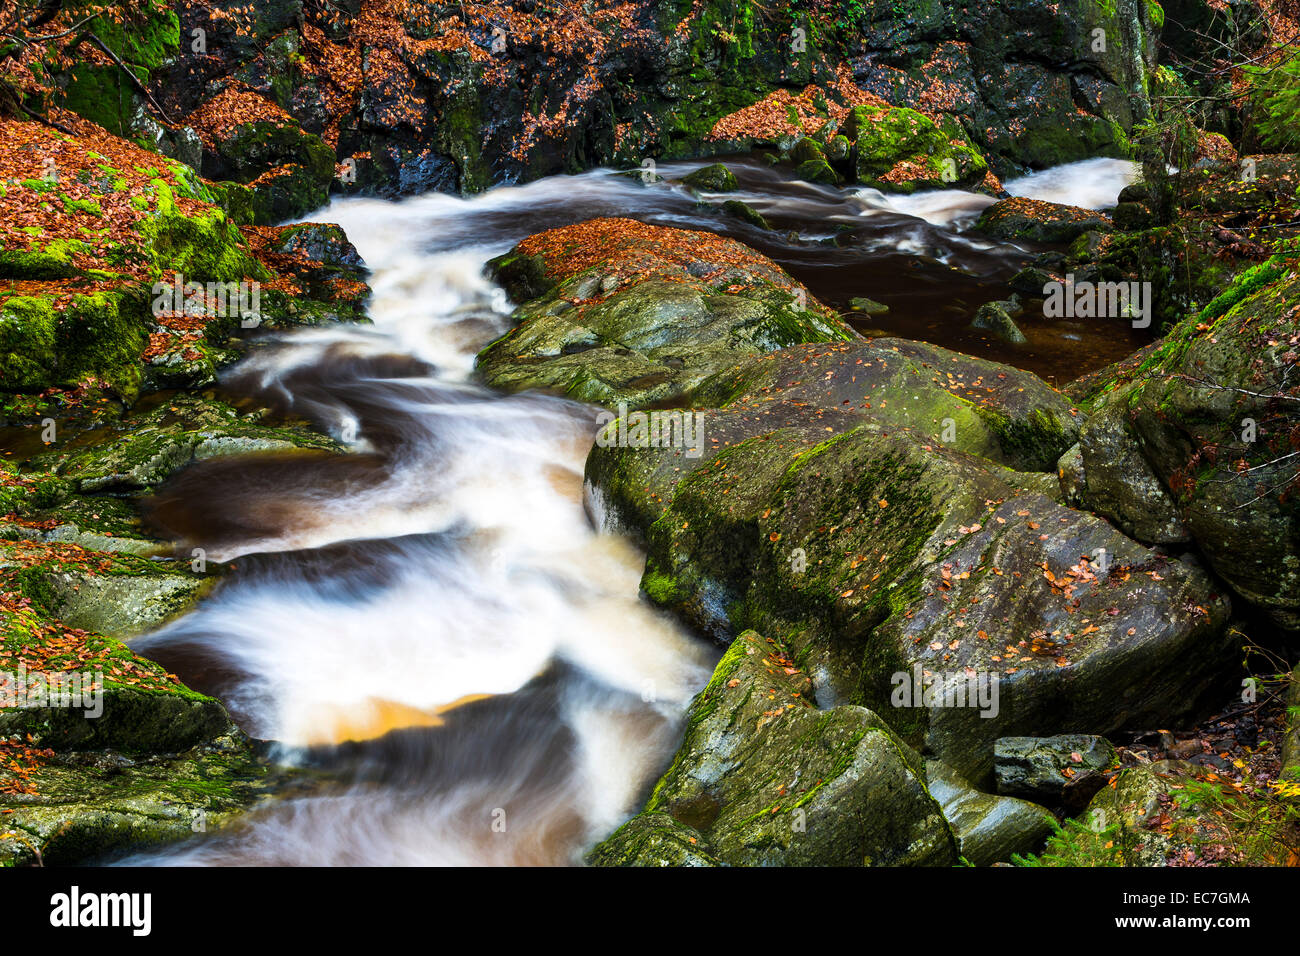 Germany, Bavarian Forest National Park, Steinbach gorge in autumn Stock Photo